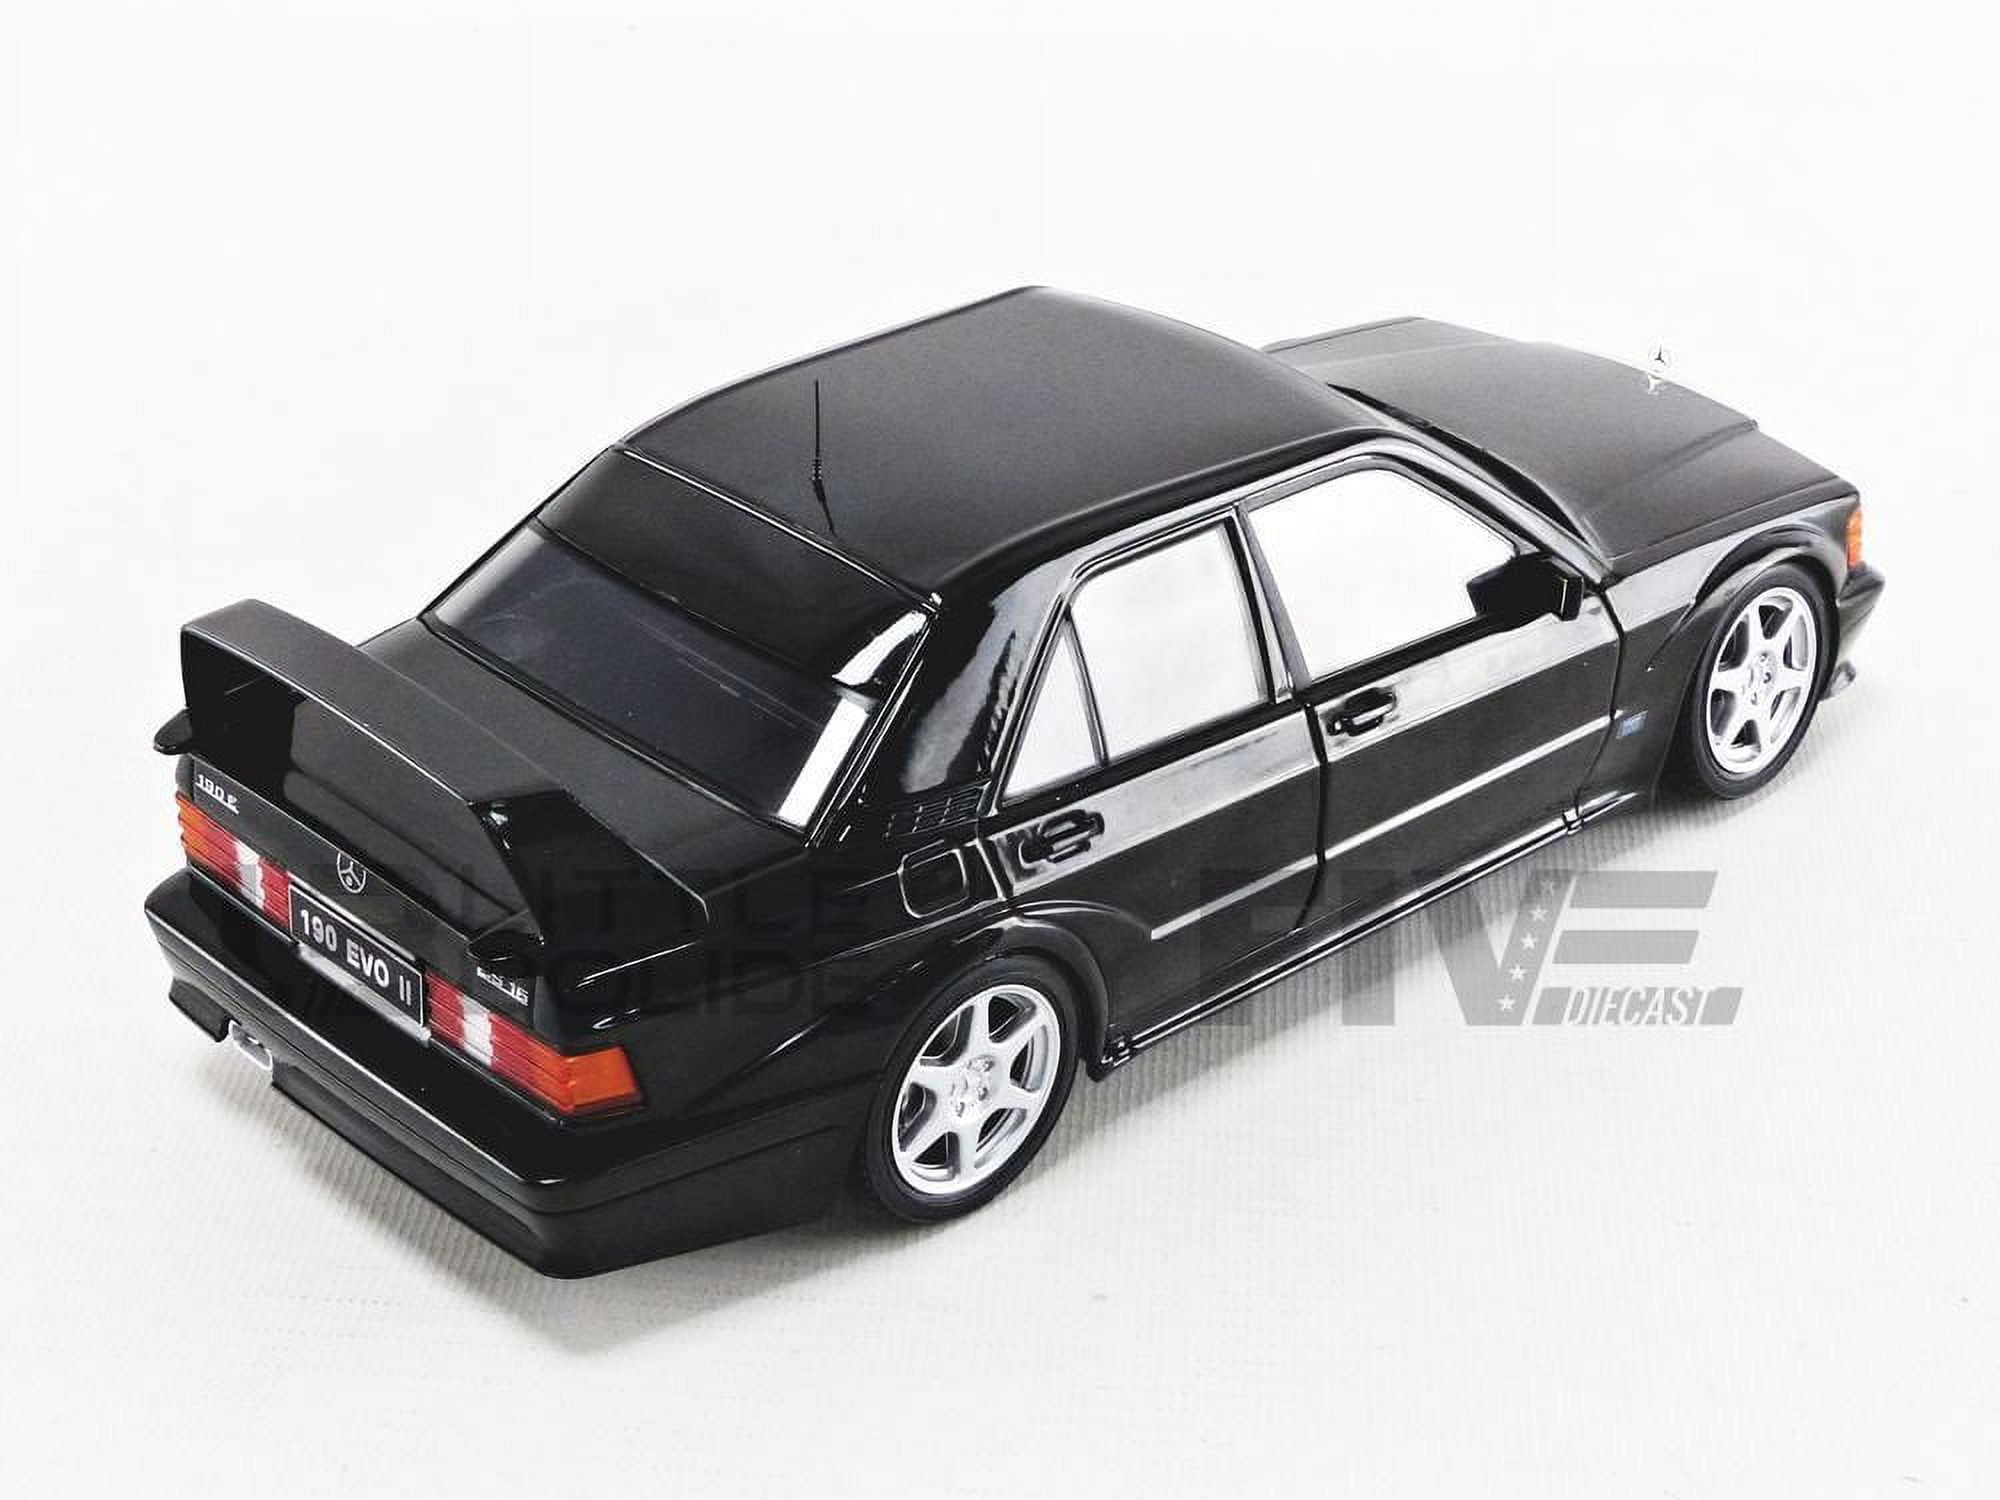 Solido 1:18 - 1 - Model car - Mercedes-Benz 190E 2.5-16 Evolution II -  Diecast model with opening front doors - Catawiki